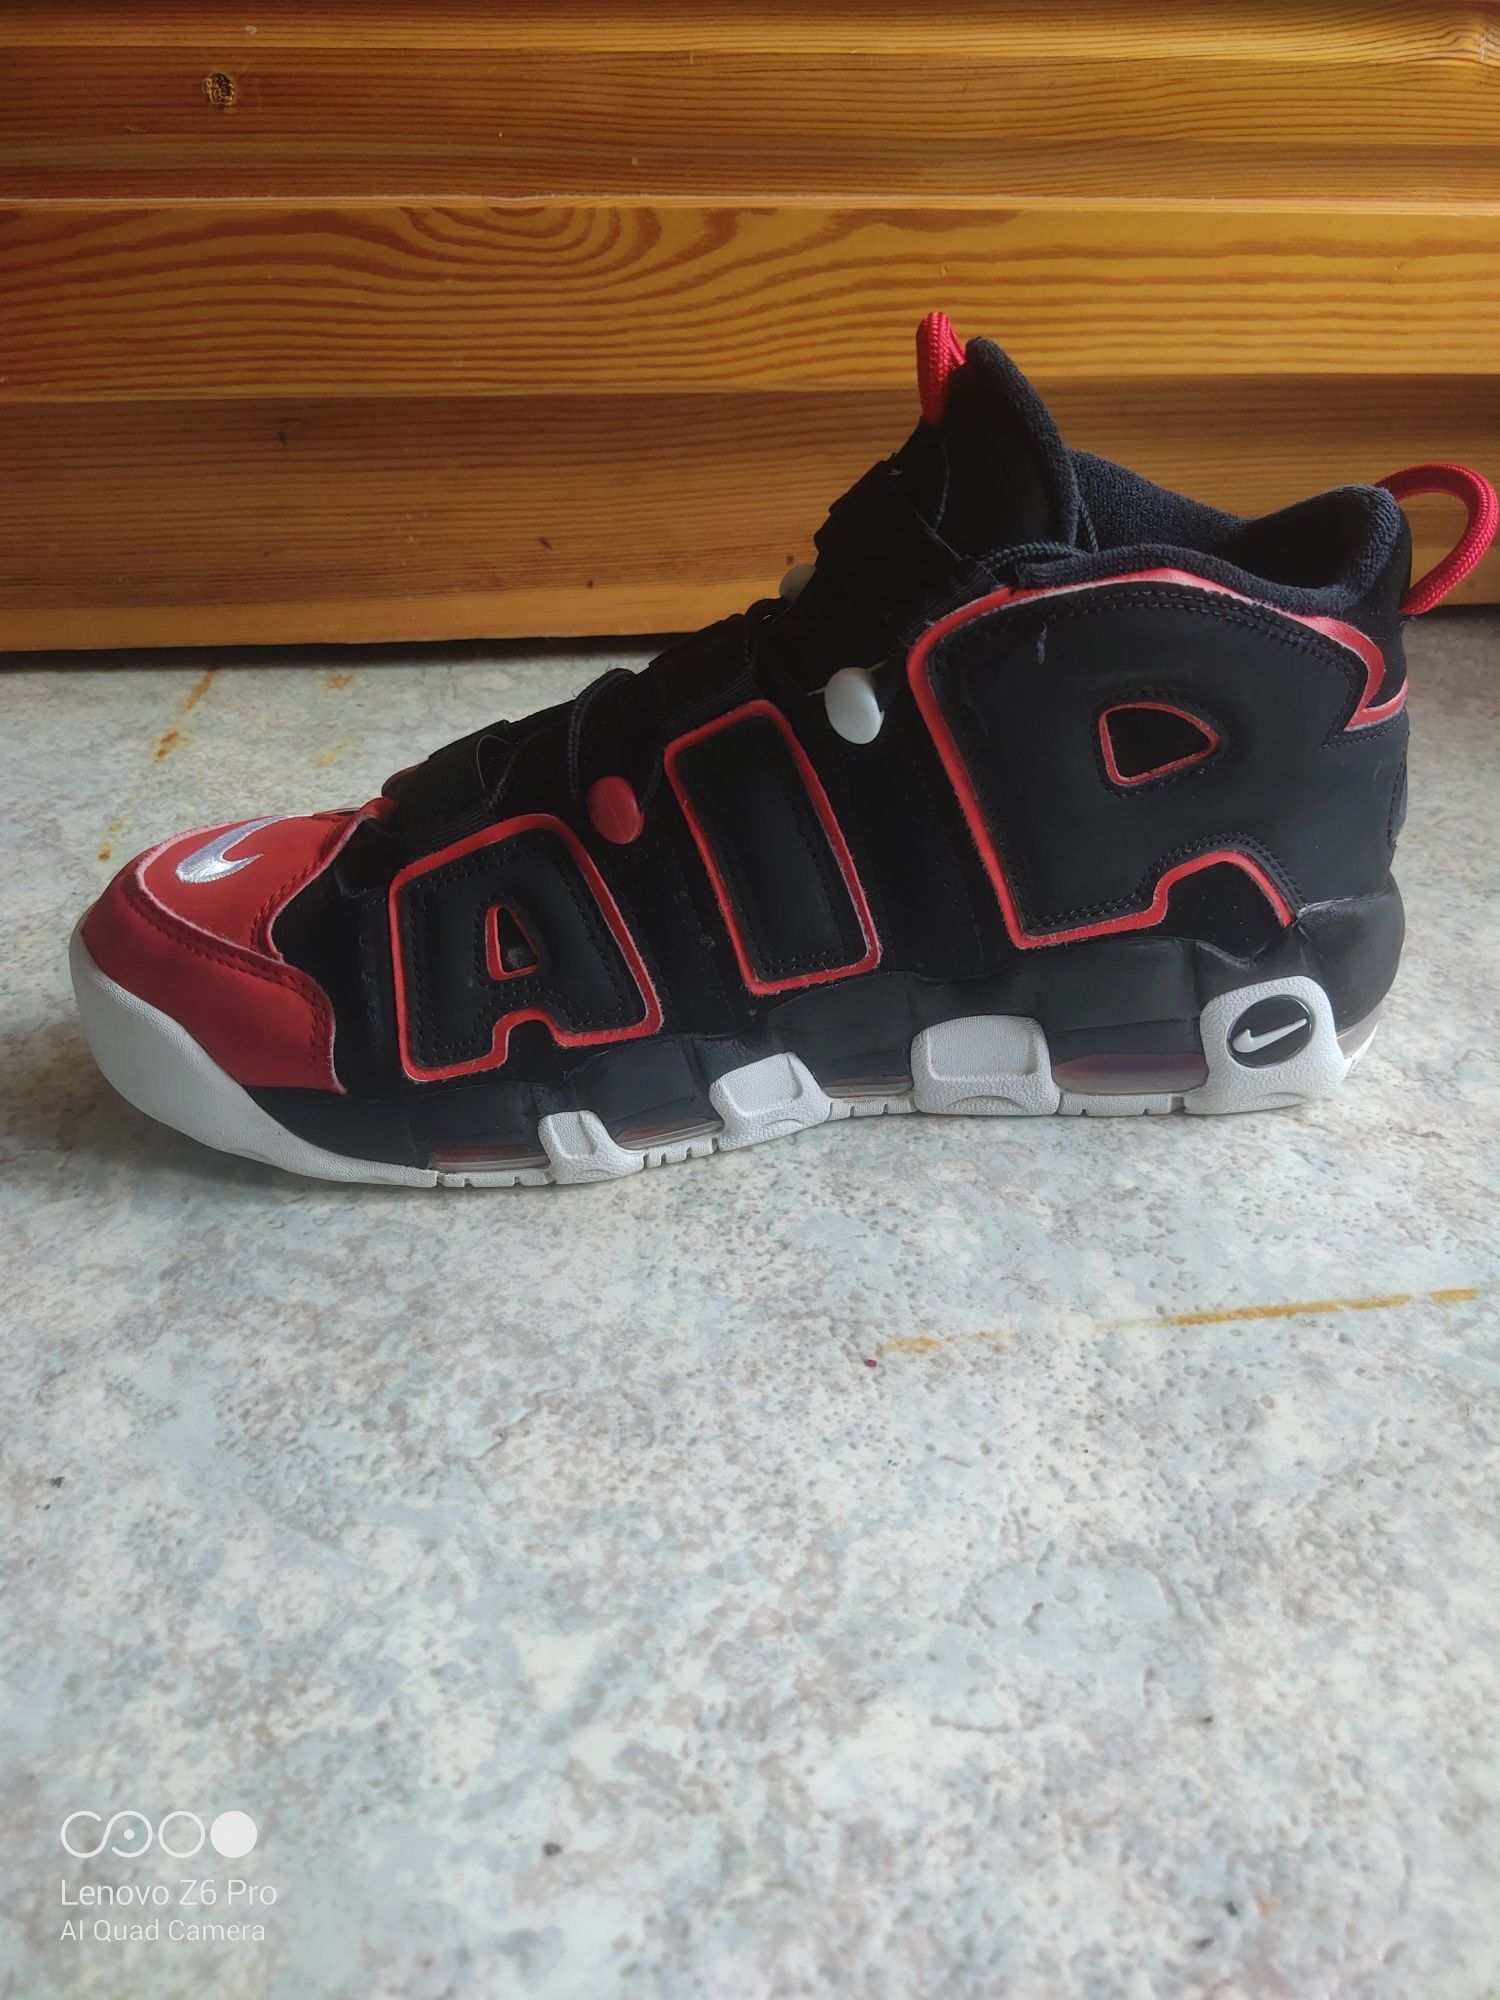 Nike Air more uptendo(red)